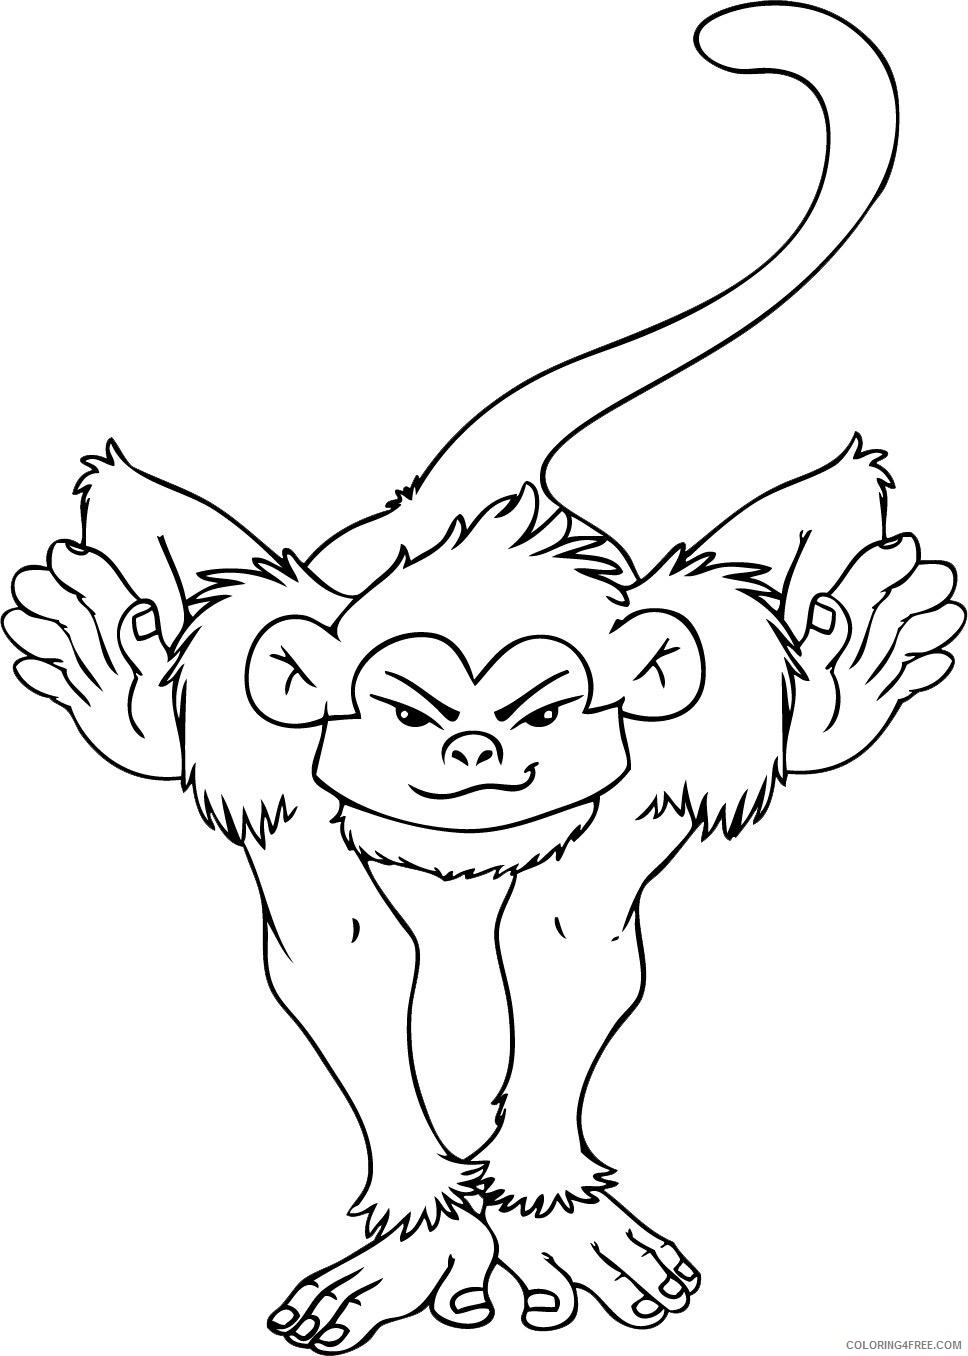 Spider Monkey Coloring Pages spider monkey 89 jpg Printable Coloring4free